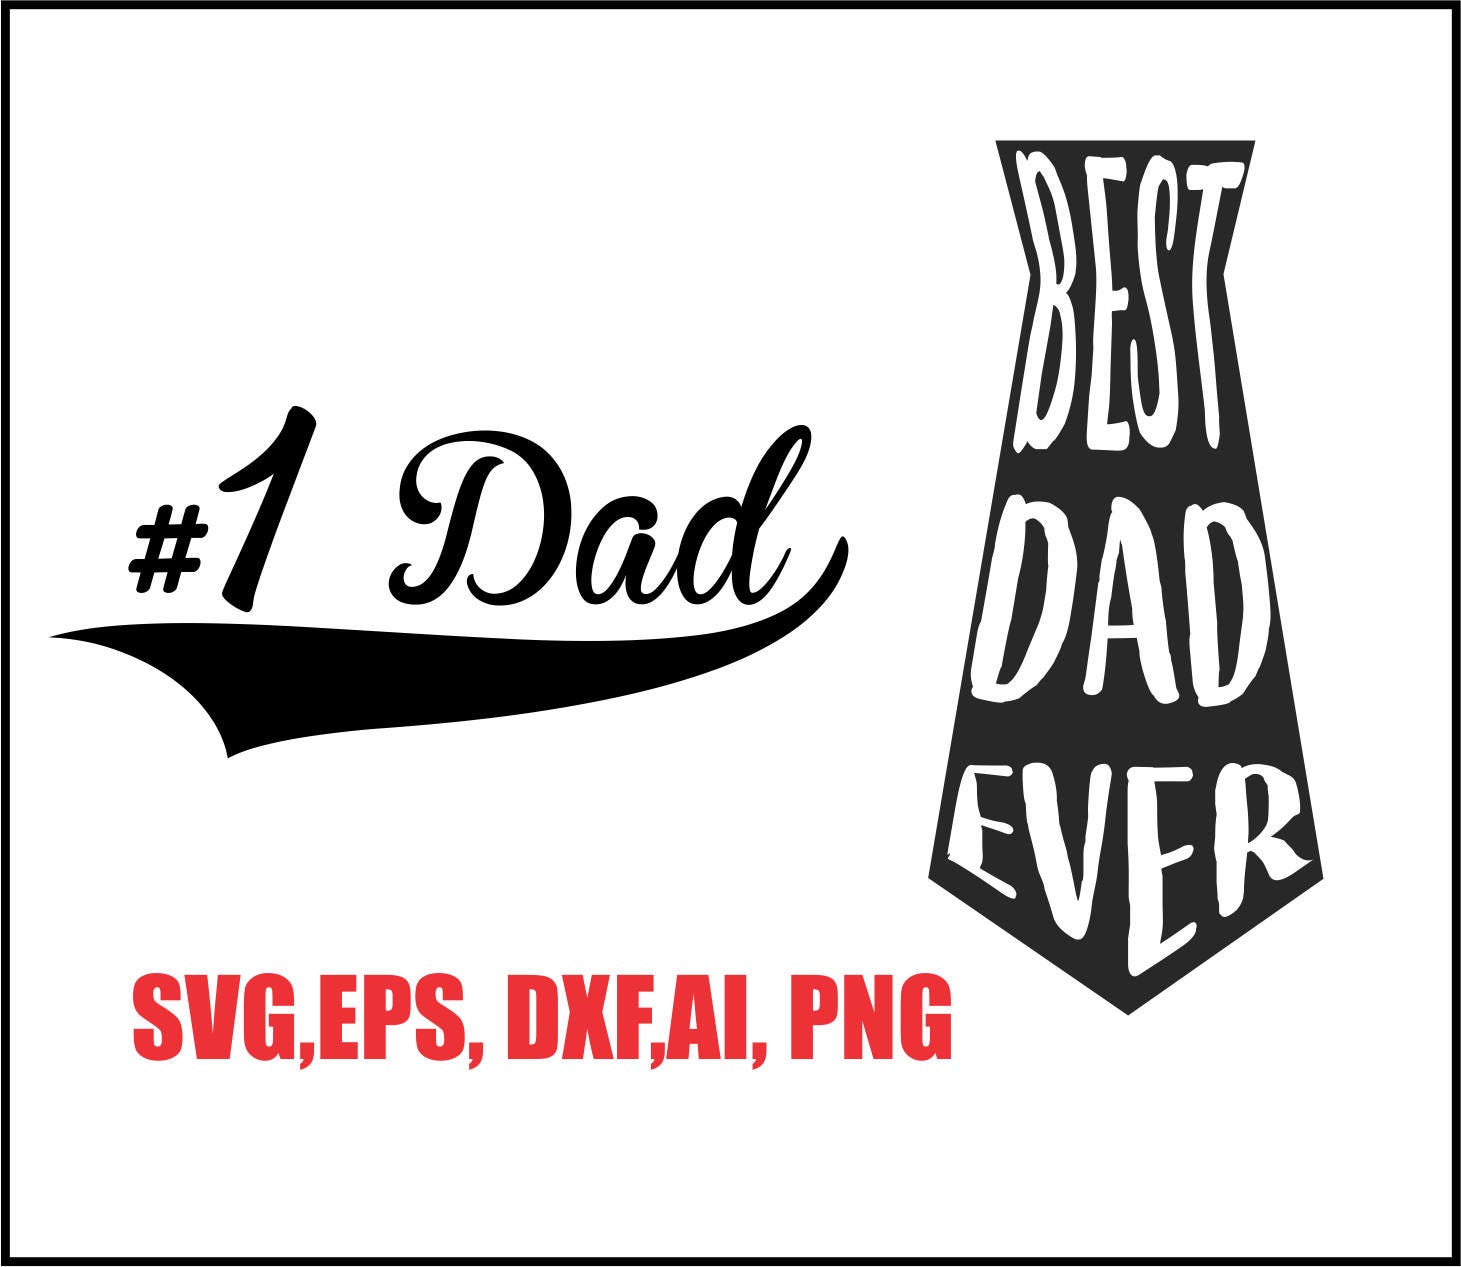 Download No. 1 dad and Best Dad Ever in svg,eps,ai,png,dxf. INSTANT DOWNLOAD from ArrowSVGStudio on Etsy ...